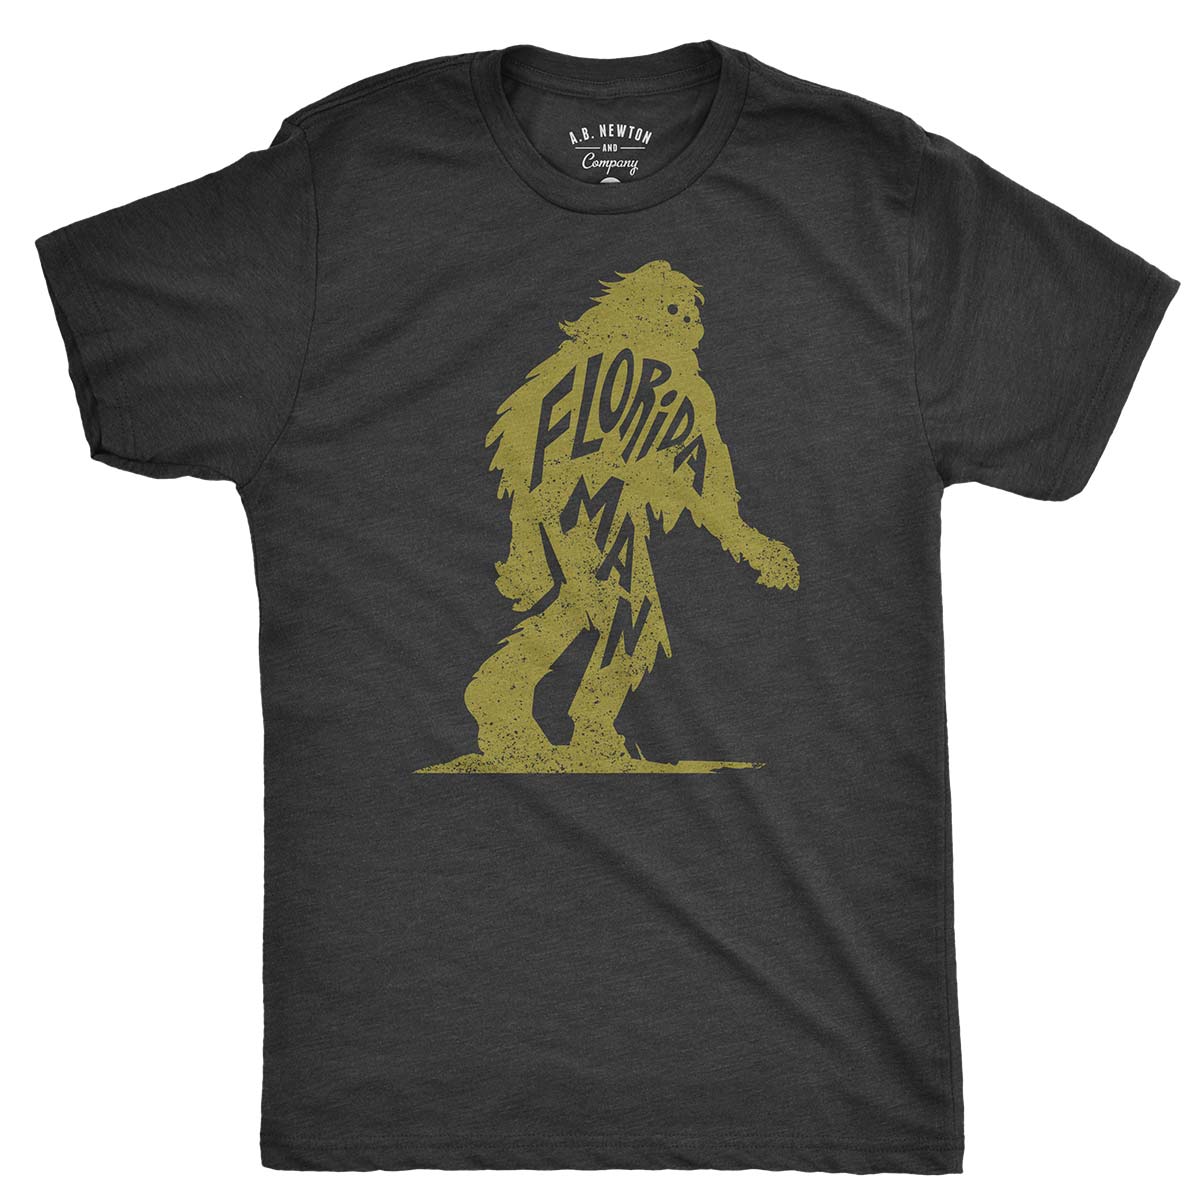 Florida Man Graphic T-Shirt | The Man, The Myth, The Florida Legend is Real